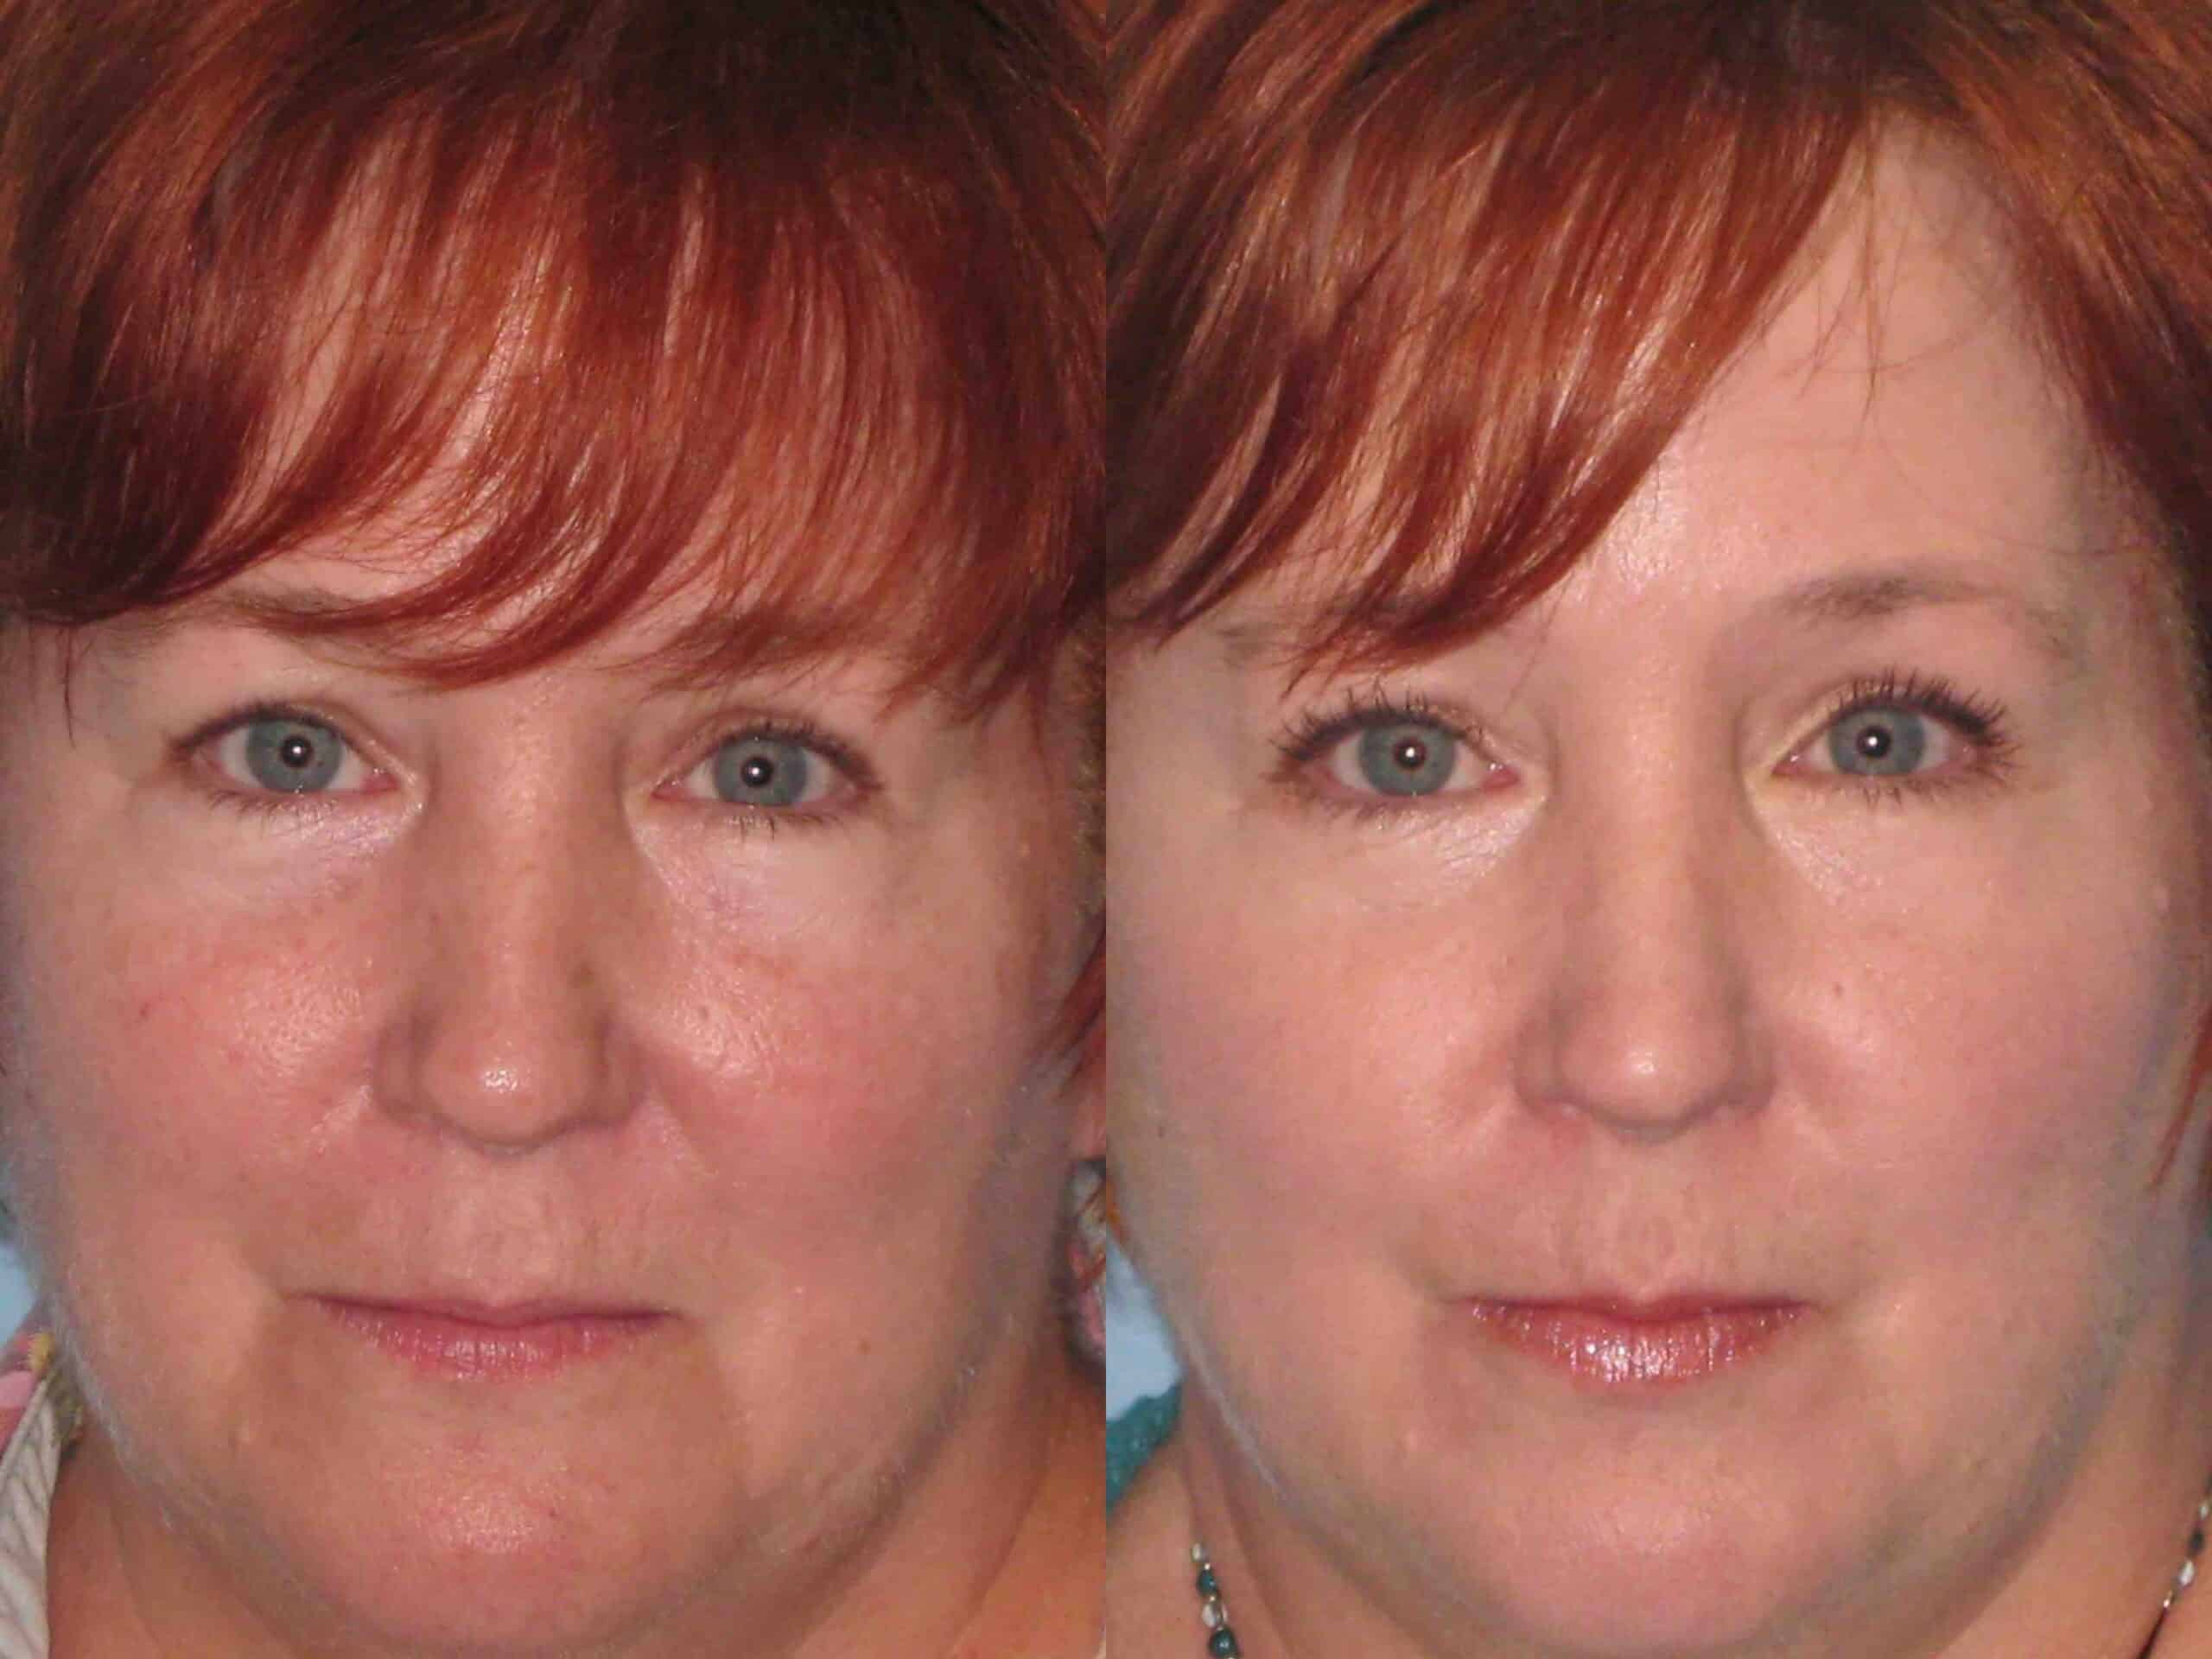 Before and after, 3 mo post-treatment from Laser Resurfacing performed by Dr. Paul Vanek